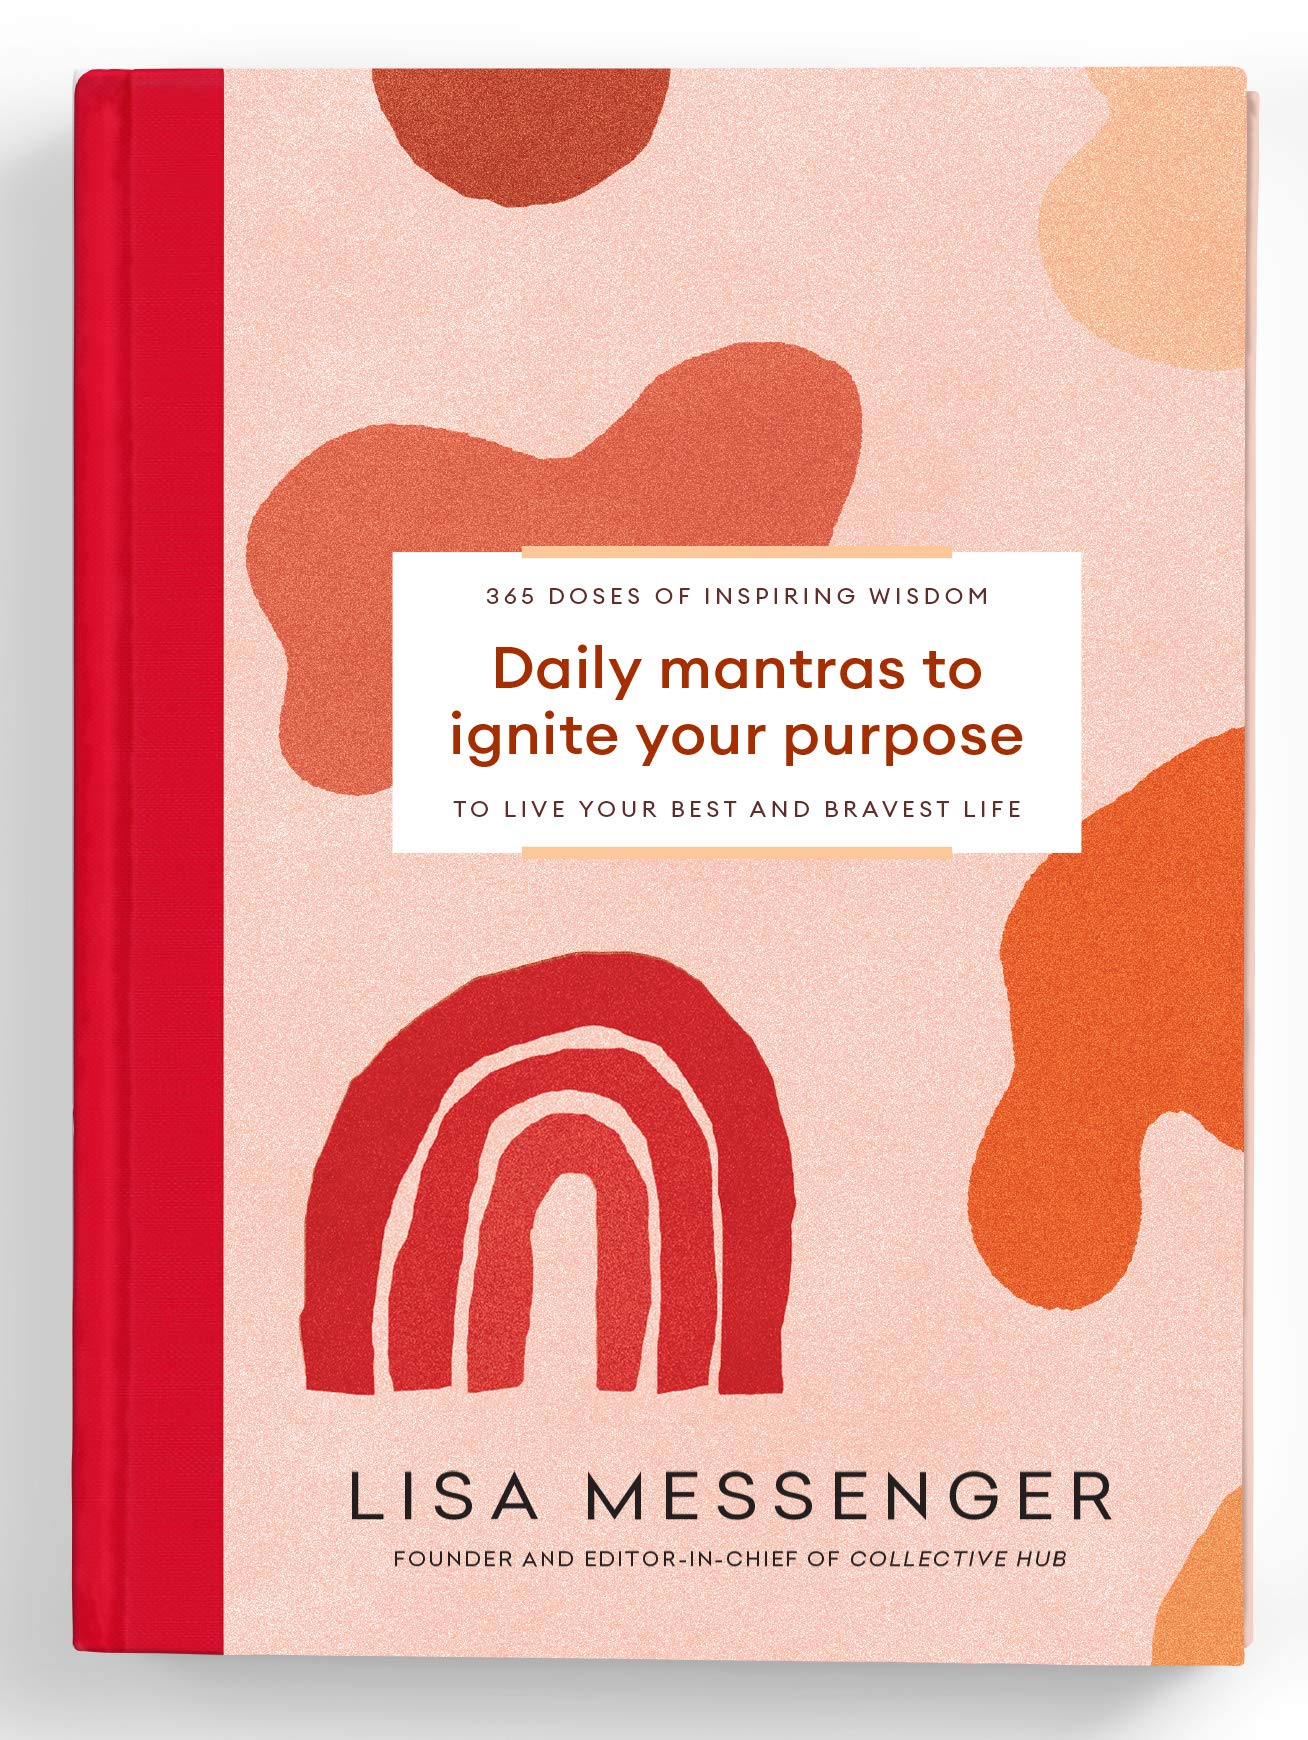 Daily Mantras To Ignite Your Purpose by Lisa Messenger